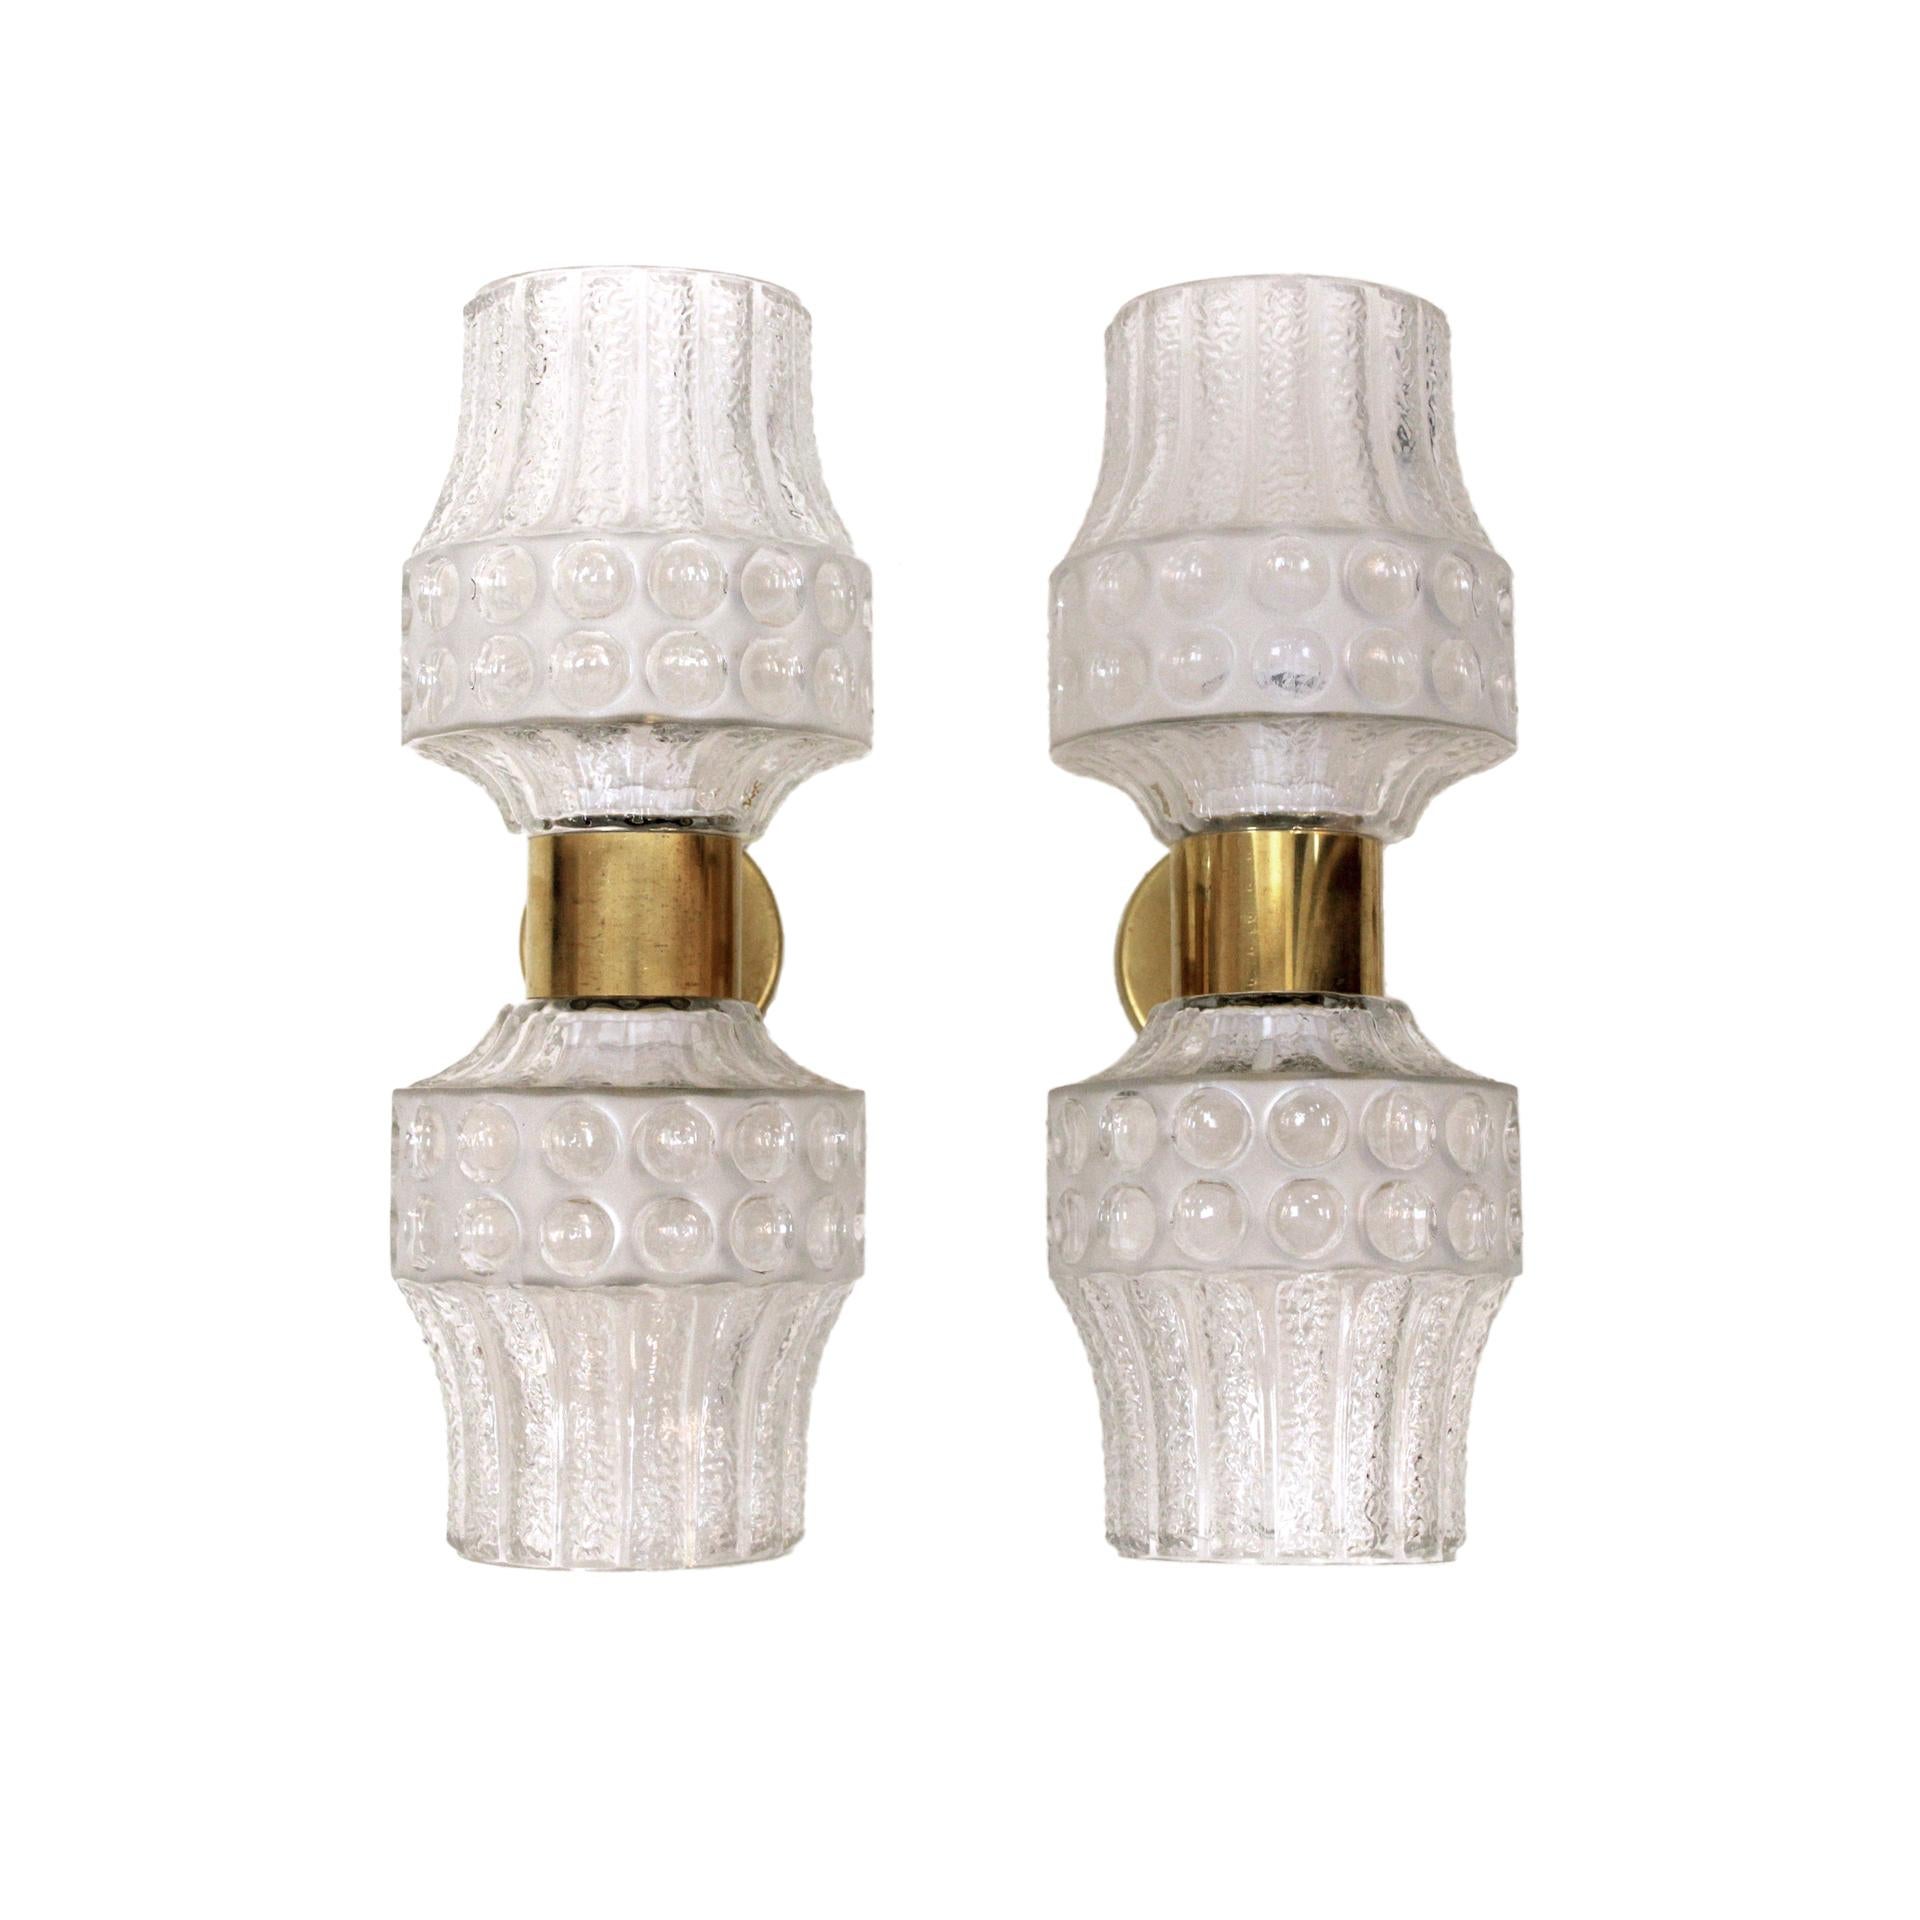 Pair of sconces, made with brass structure and hand carved murano glass. Italian manufacture.

Every item LA Studio offers is checked by our team of 10 craftsmen in our in-house workshop. Special restoration or reupholstery requests can be done.